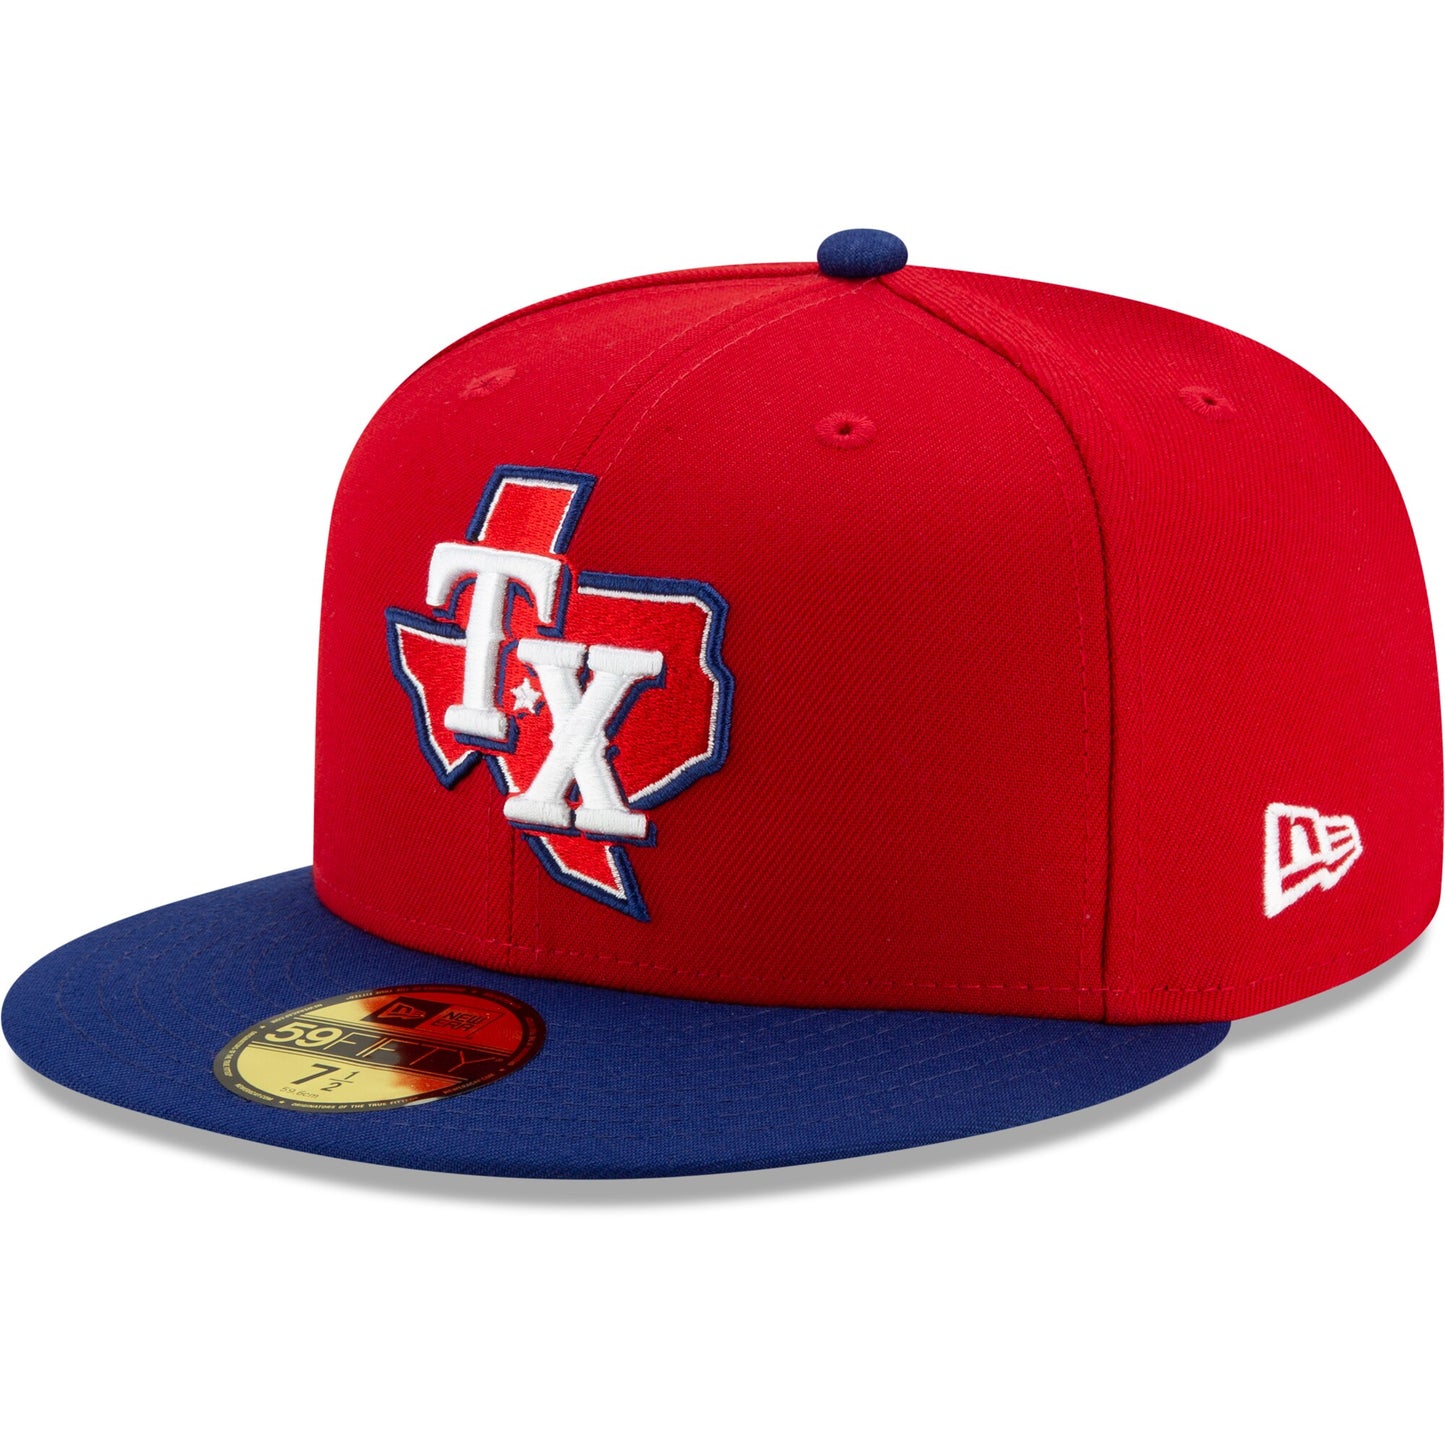 Texas Rangers New Era 2020 Alternate 3 Authentic Collection On Field 59FIFTY Fitted Hat - Red/Royal